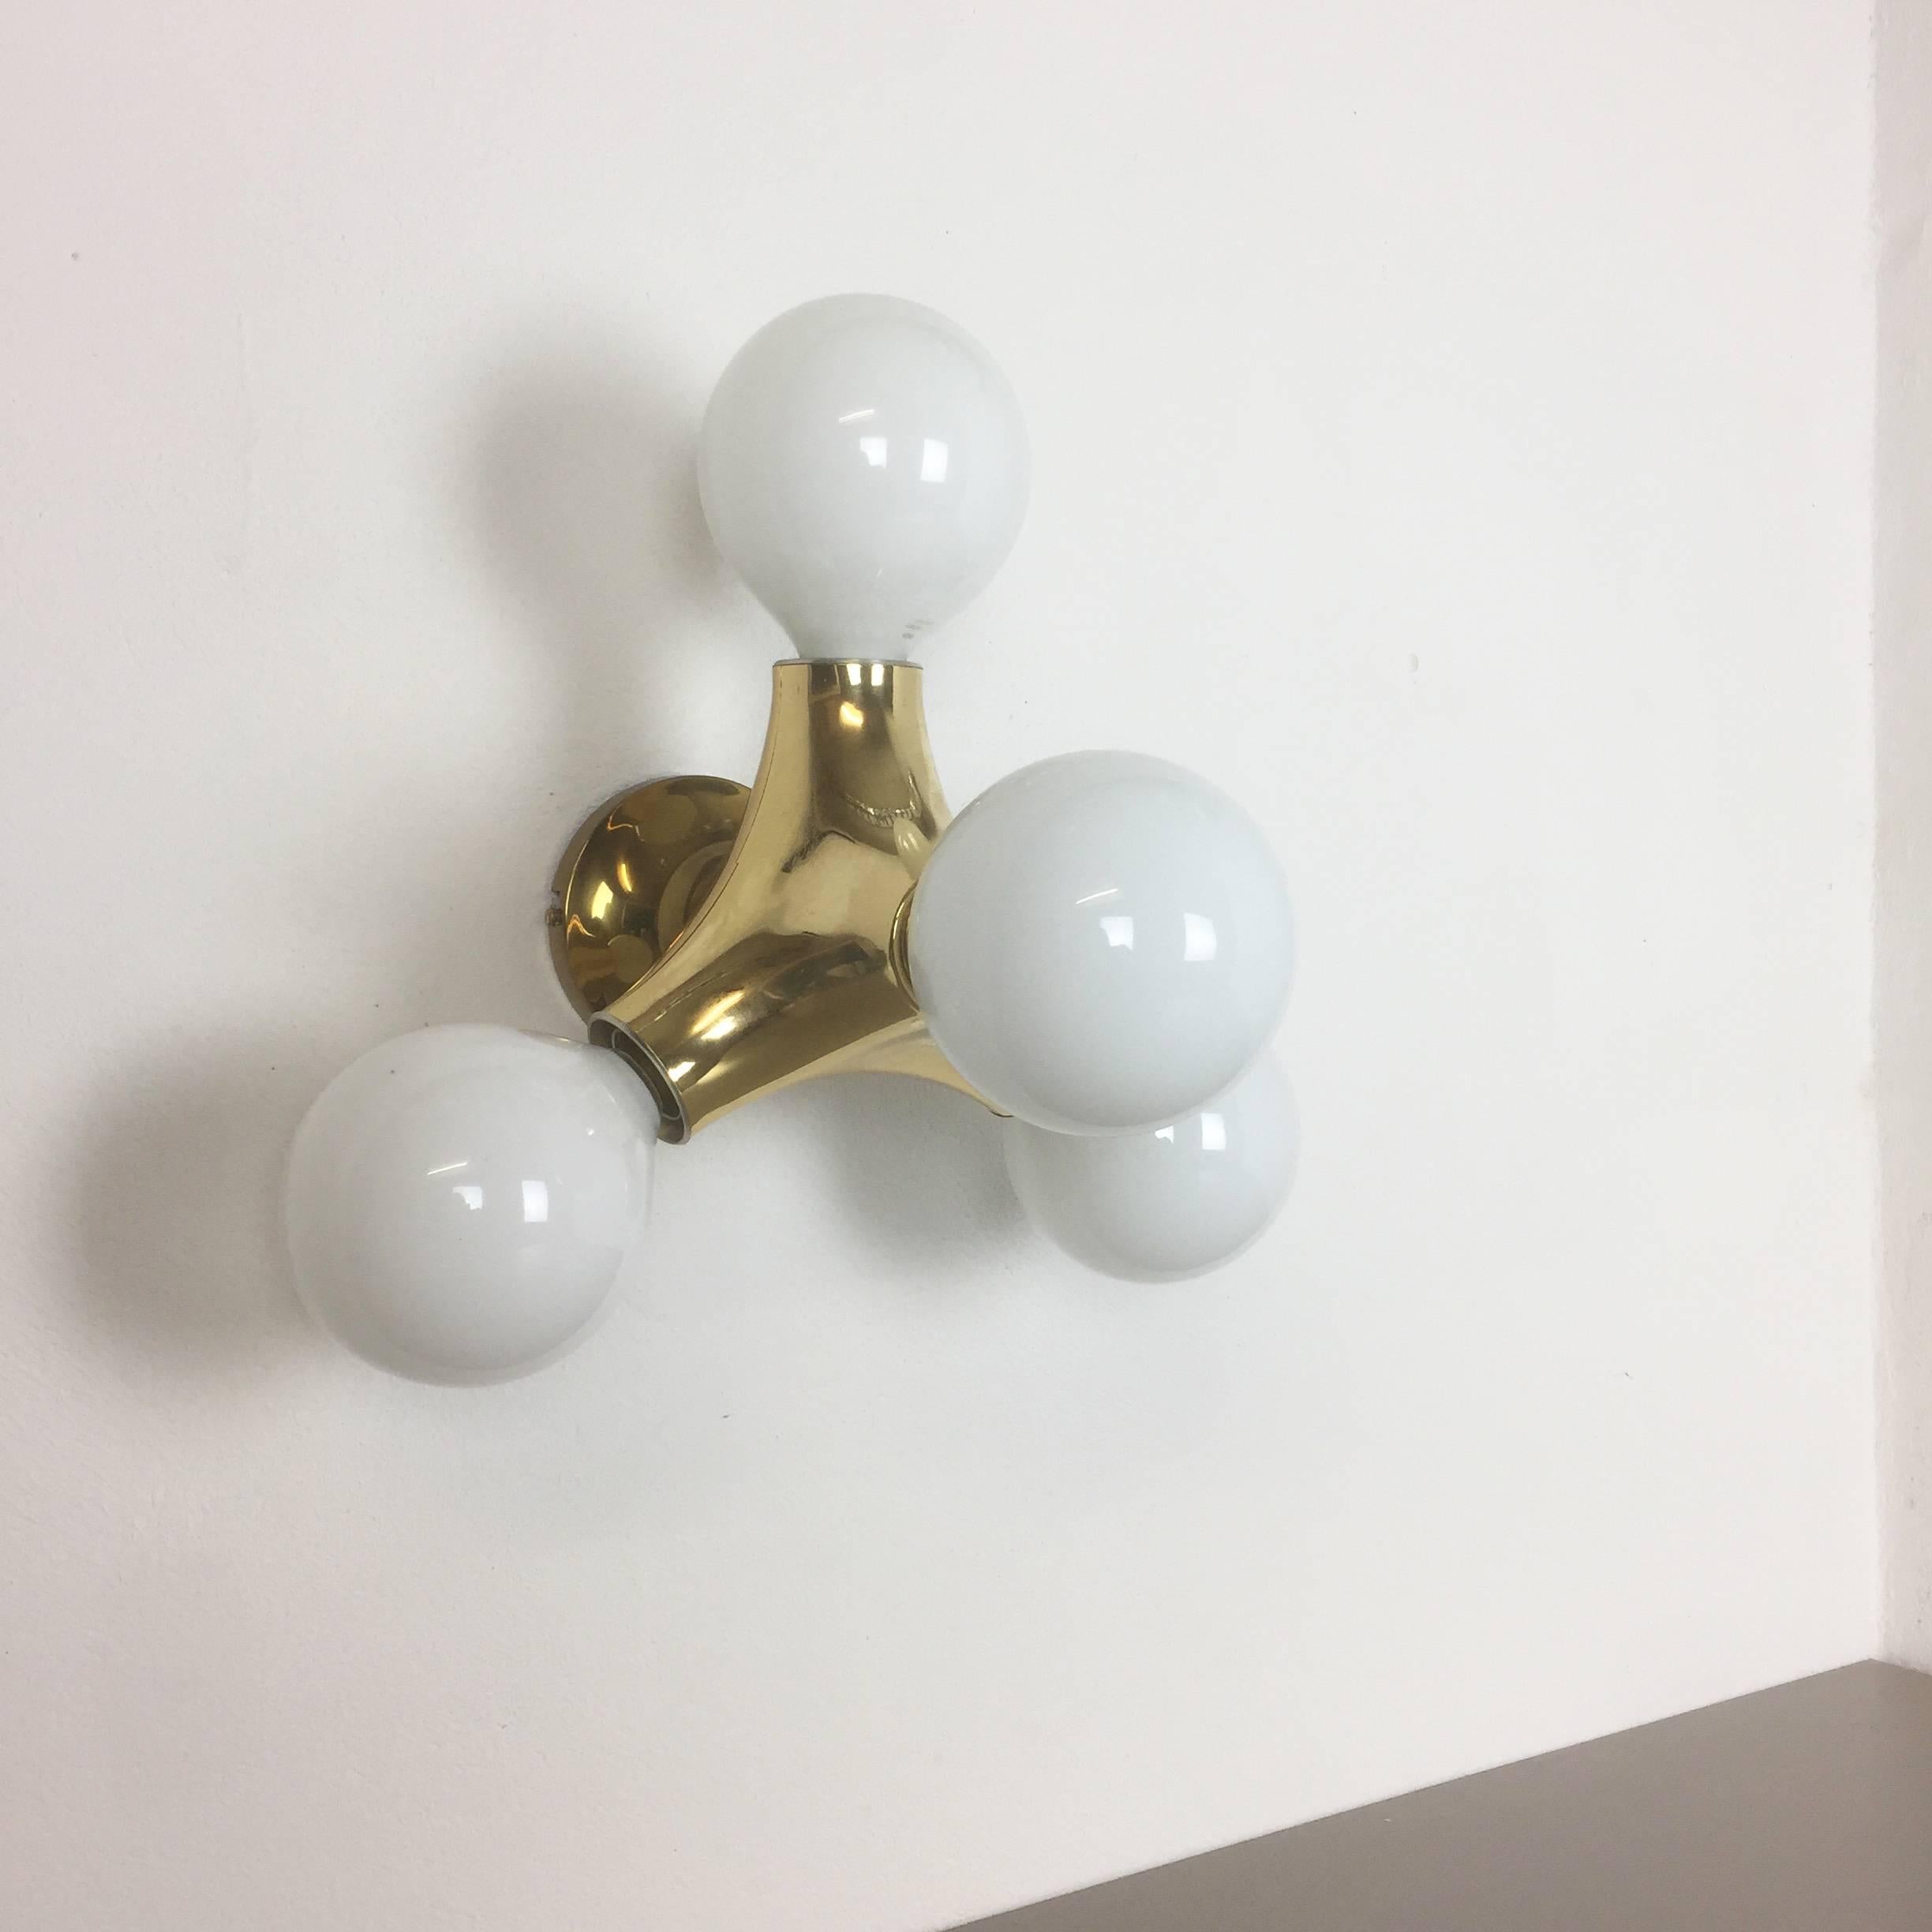 Mid-Century Modern Original Modernist 1960s Atomic Wall and Ceiling Light by Cosack Lights, Germany